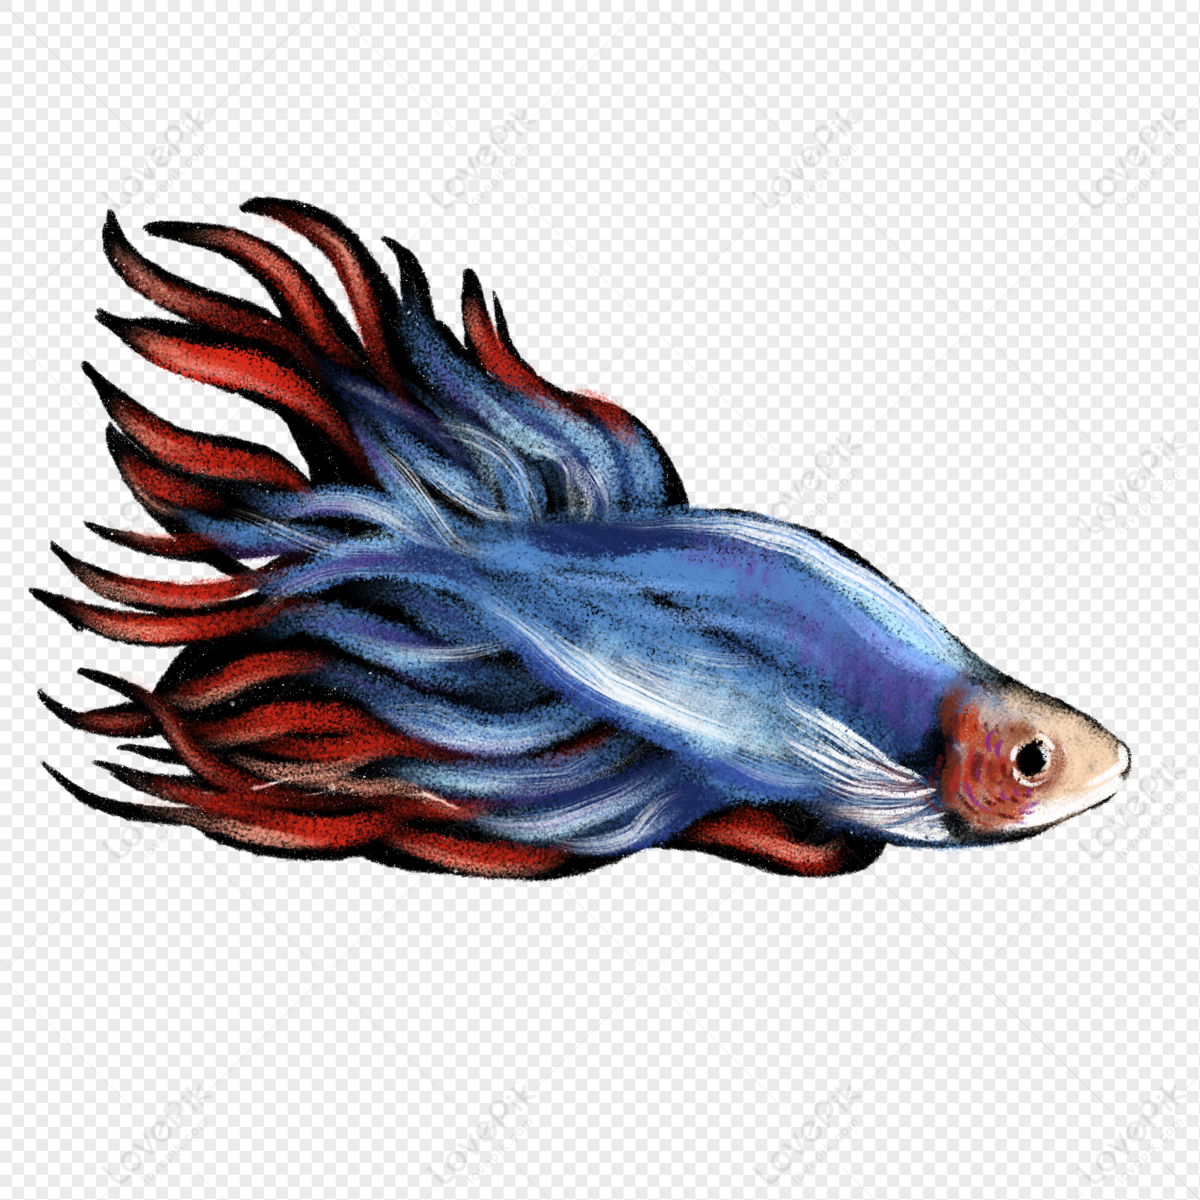 Cartoon Pretty Fish Illustration Free PNG And Clipart Image For Free  Download - Lovepik | 401300639